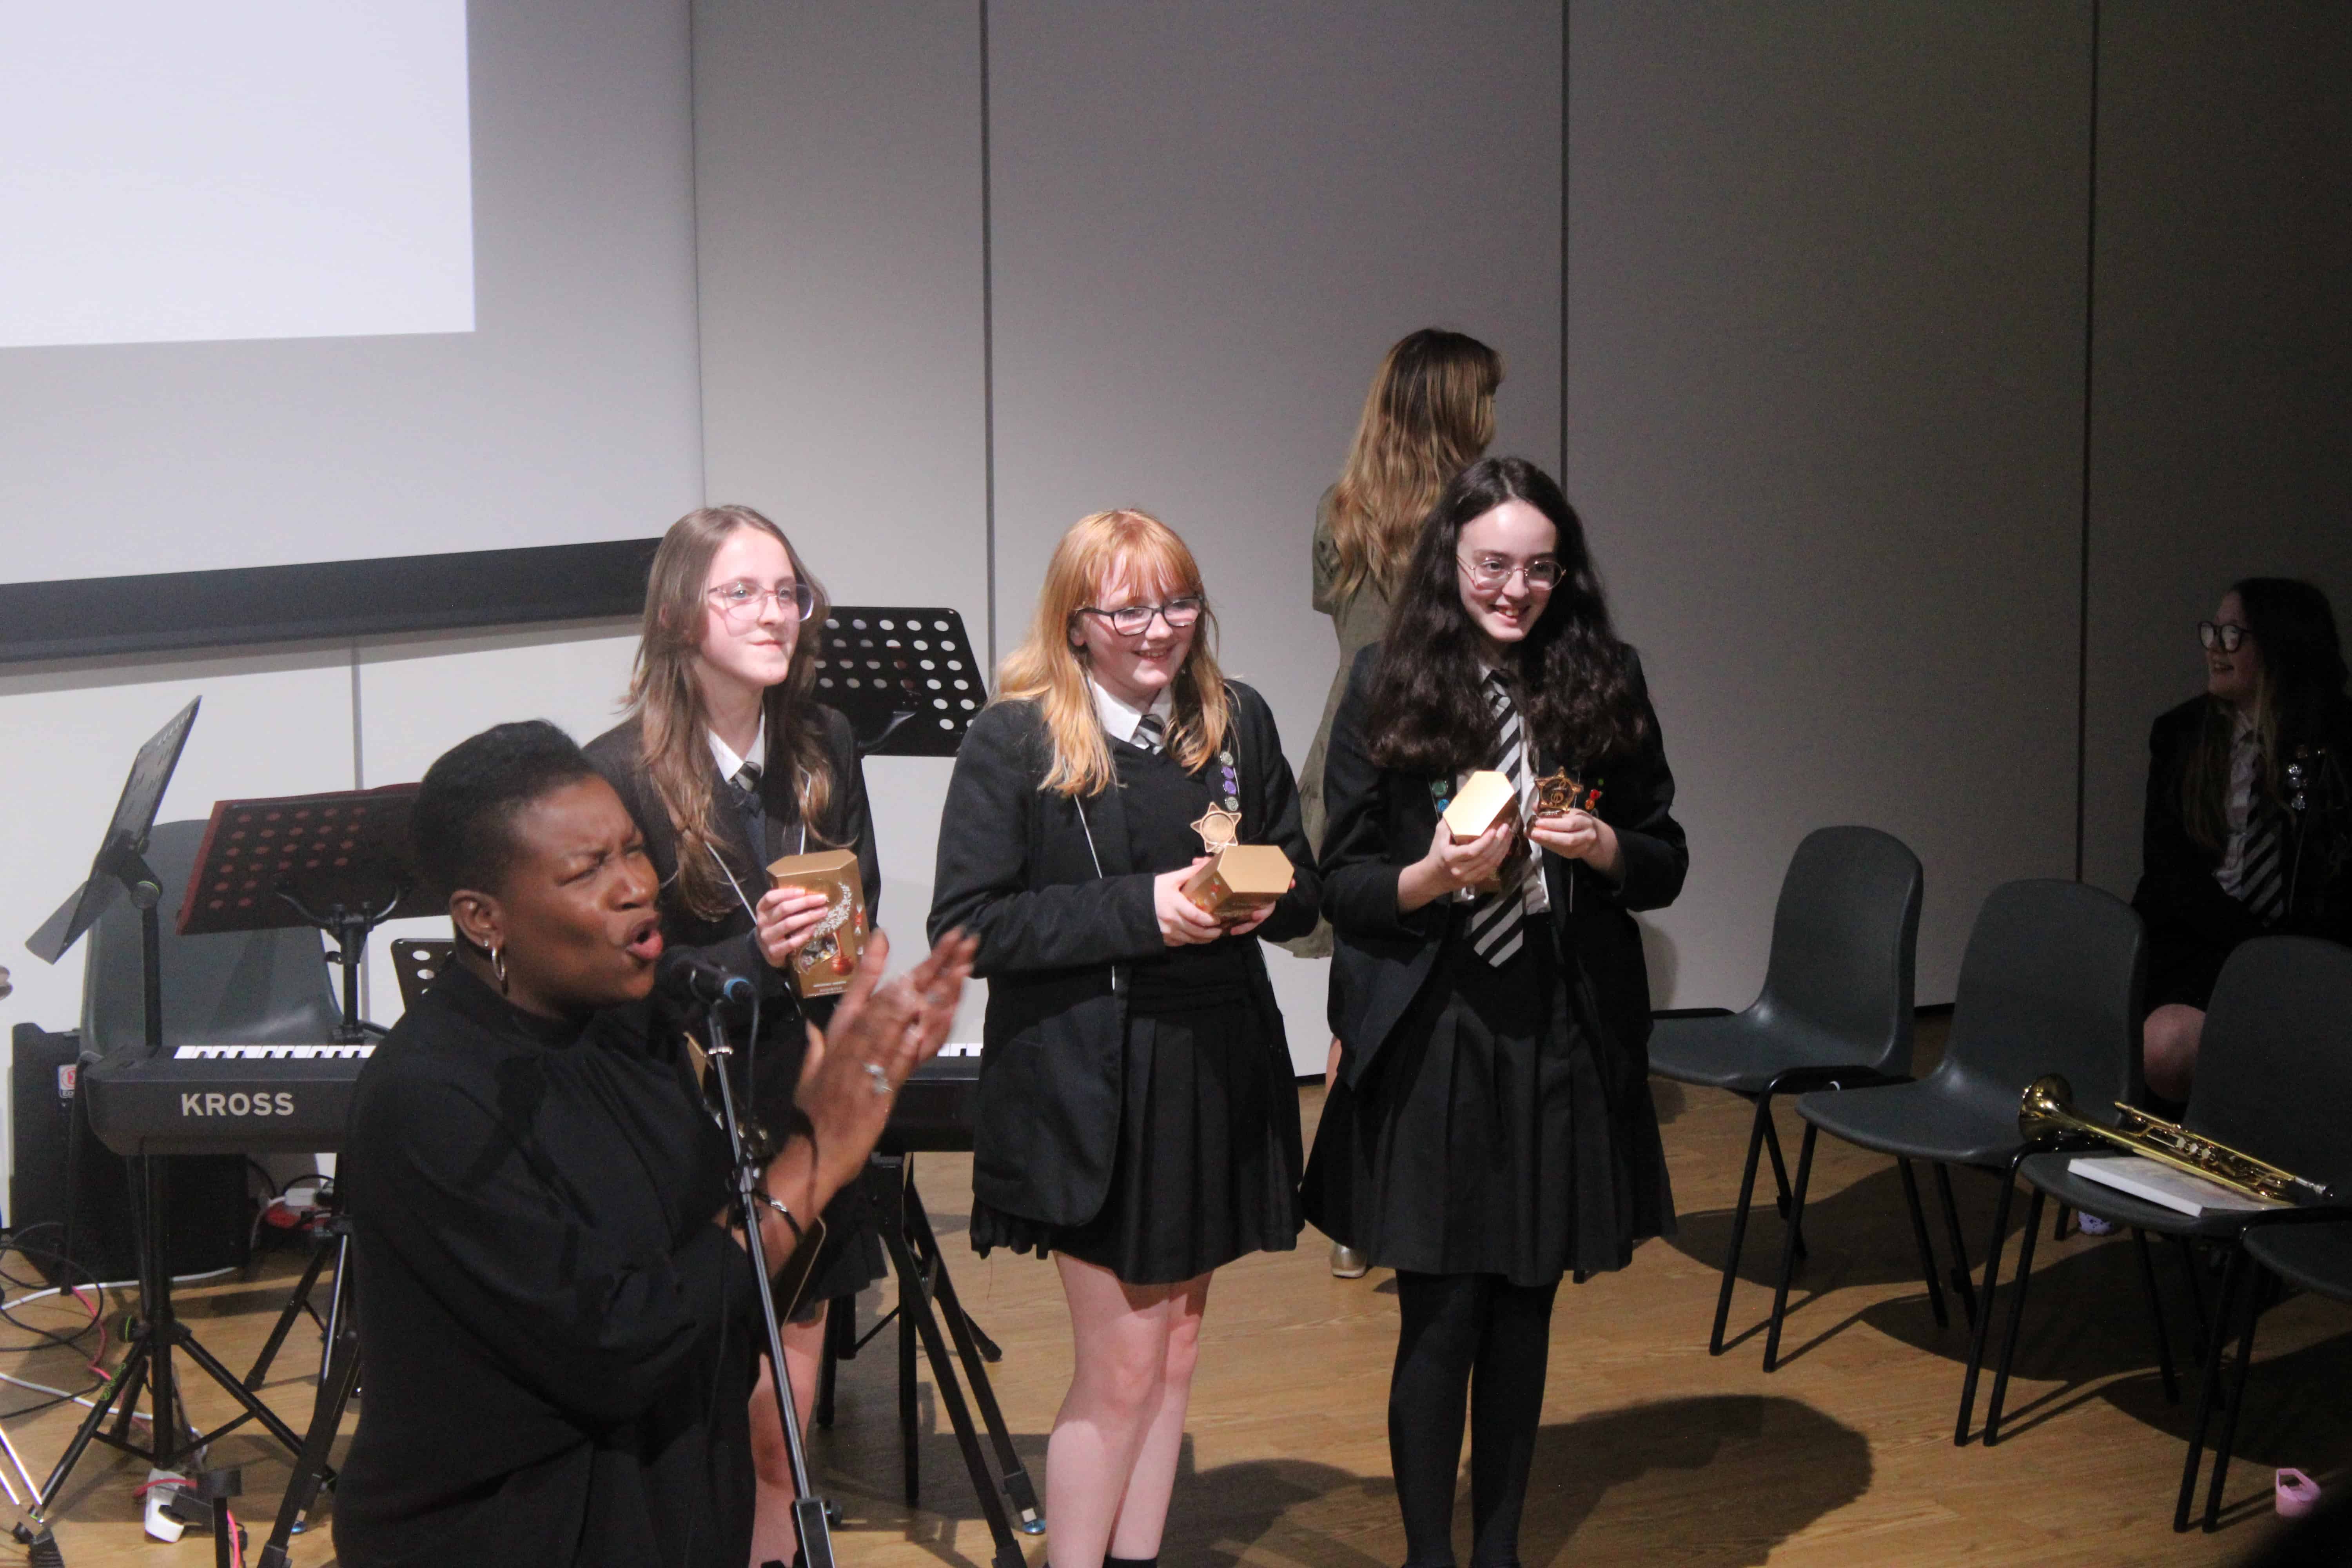 The 3 winning students stand smiling and holding their trophies in front of the Laurus Ryecroft Summer Sounds audience.